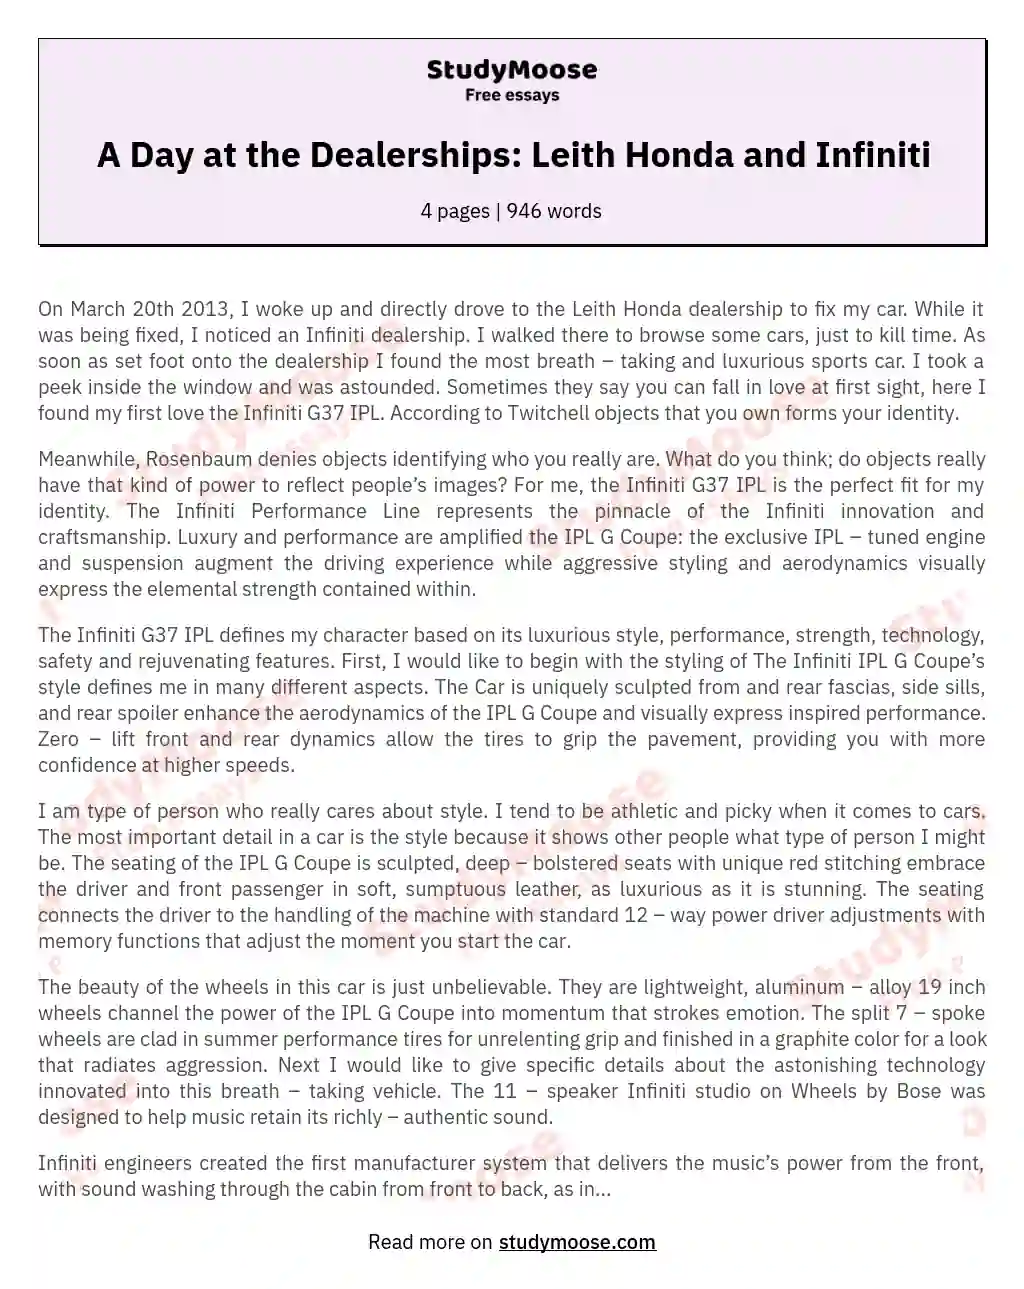 A Day at the Dealerships: Leith Honda and Infiniti essay